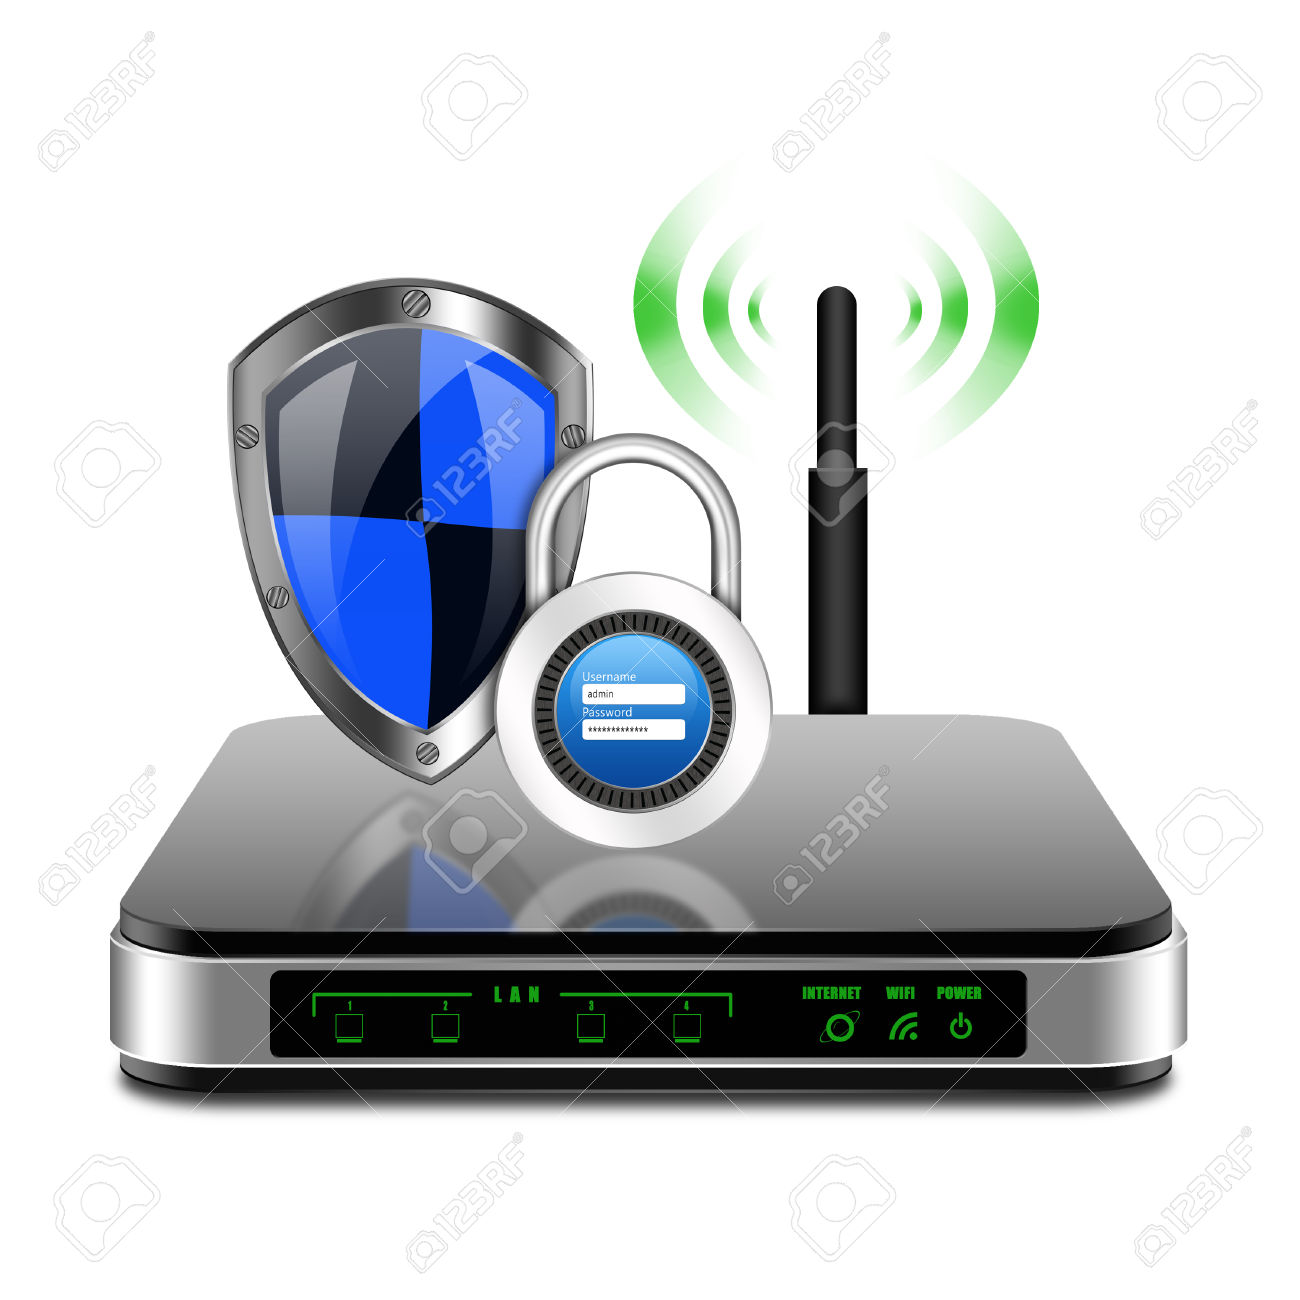 Image for protect router